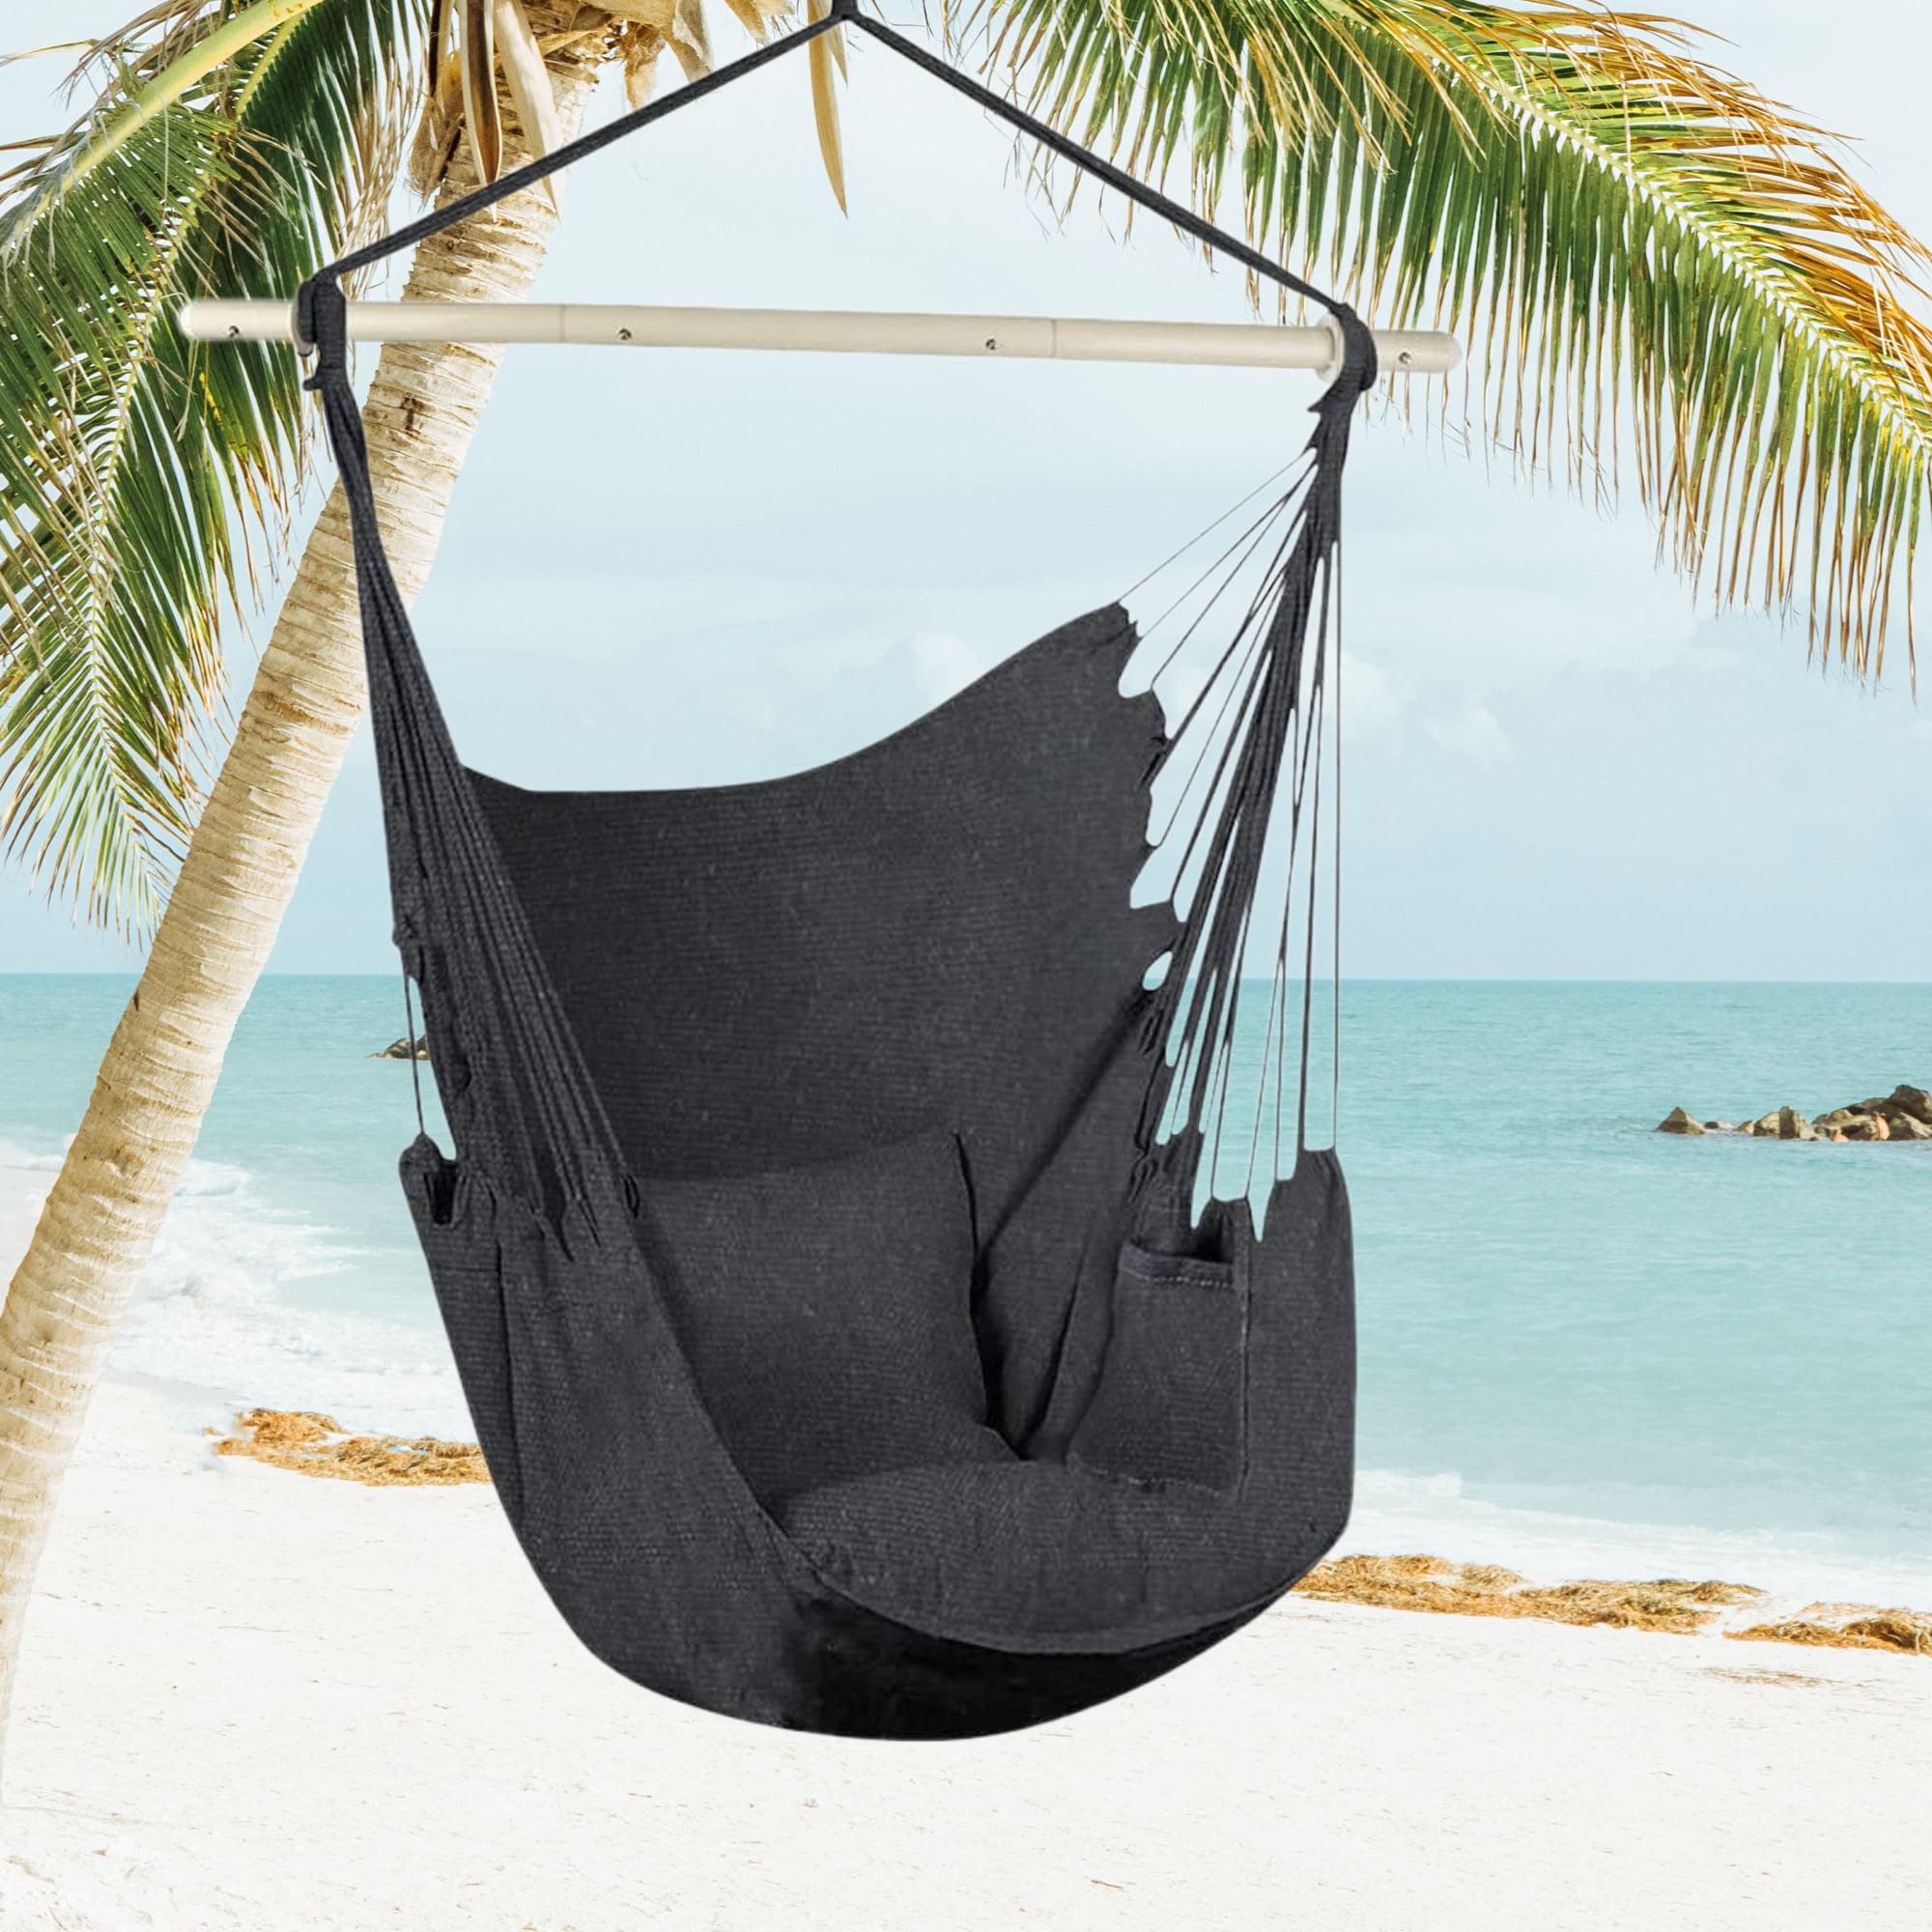 Kepooman Cotton Canvas Hammock Hanging Rope Chair, Hanging Bubble 